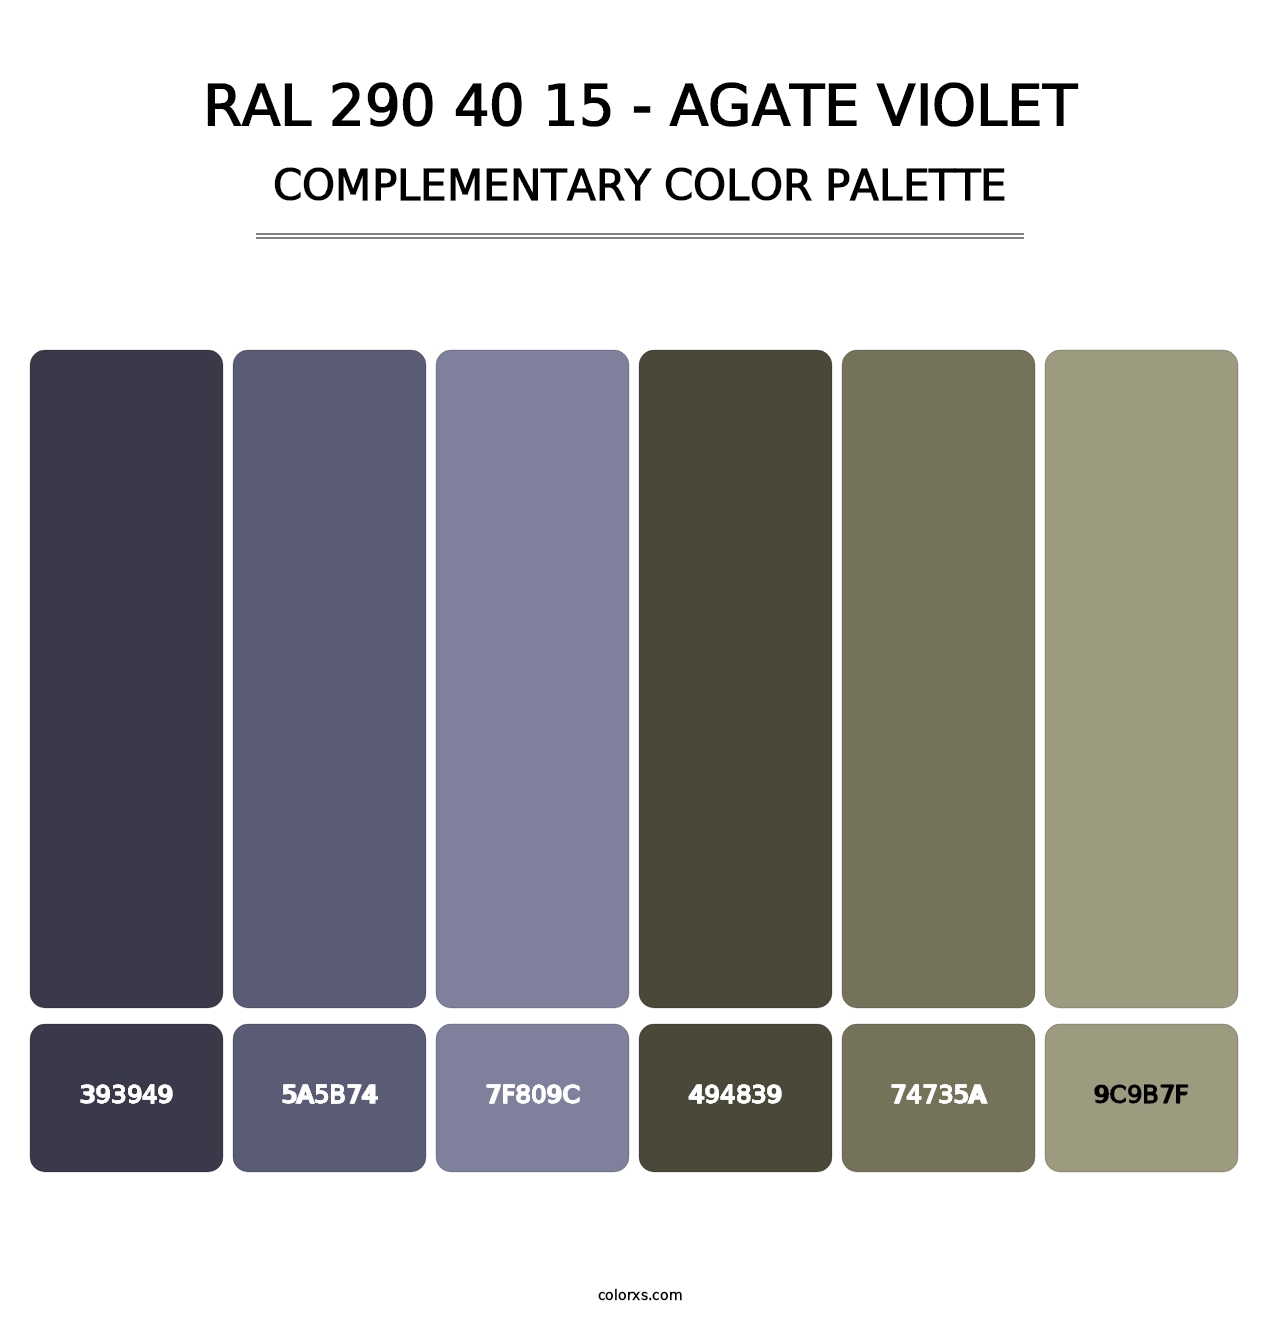 RAL 290 40 15 - Agate Violet - Complementary Color Palette